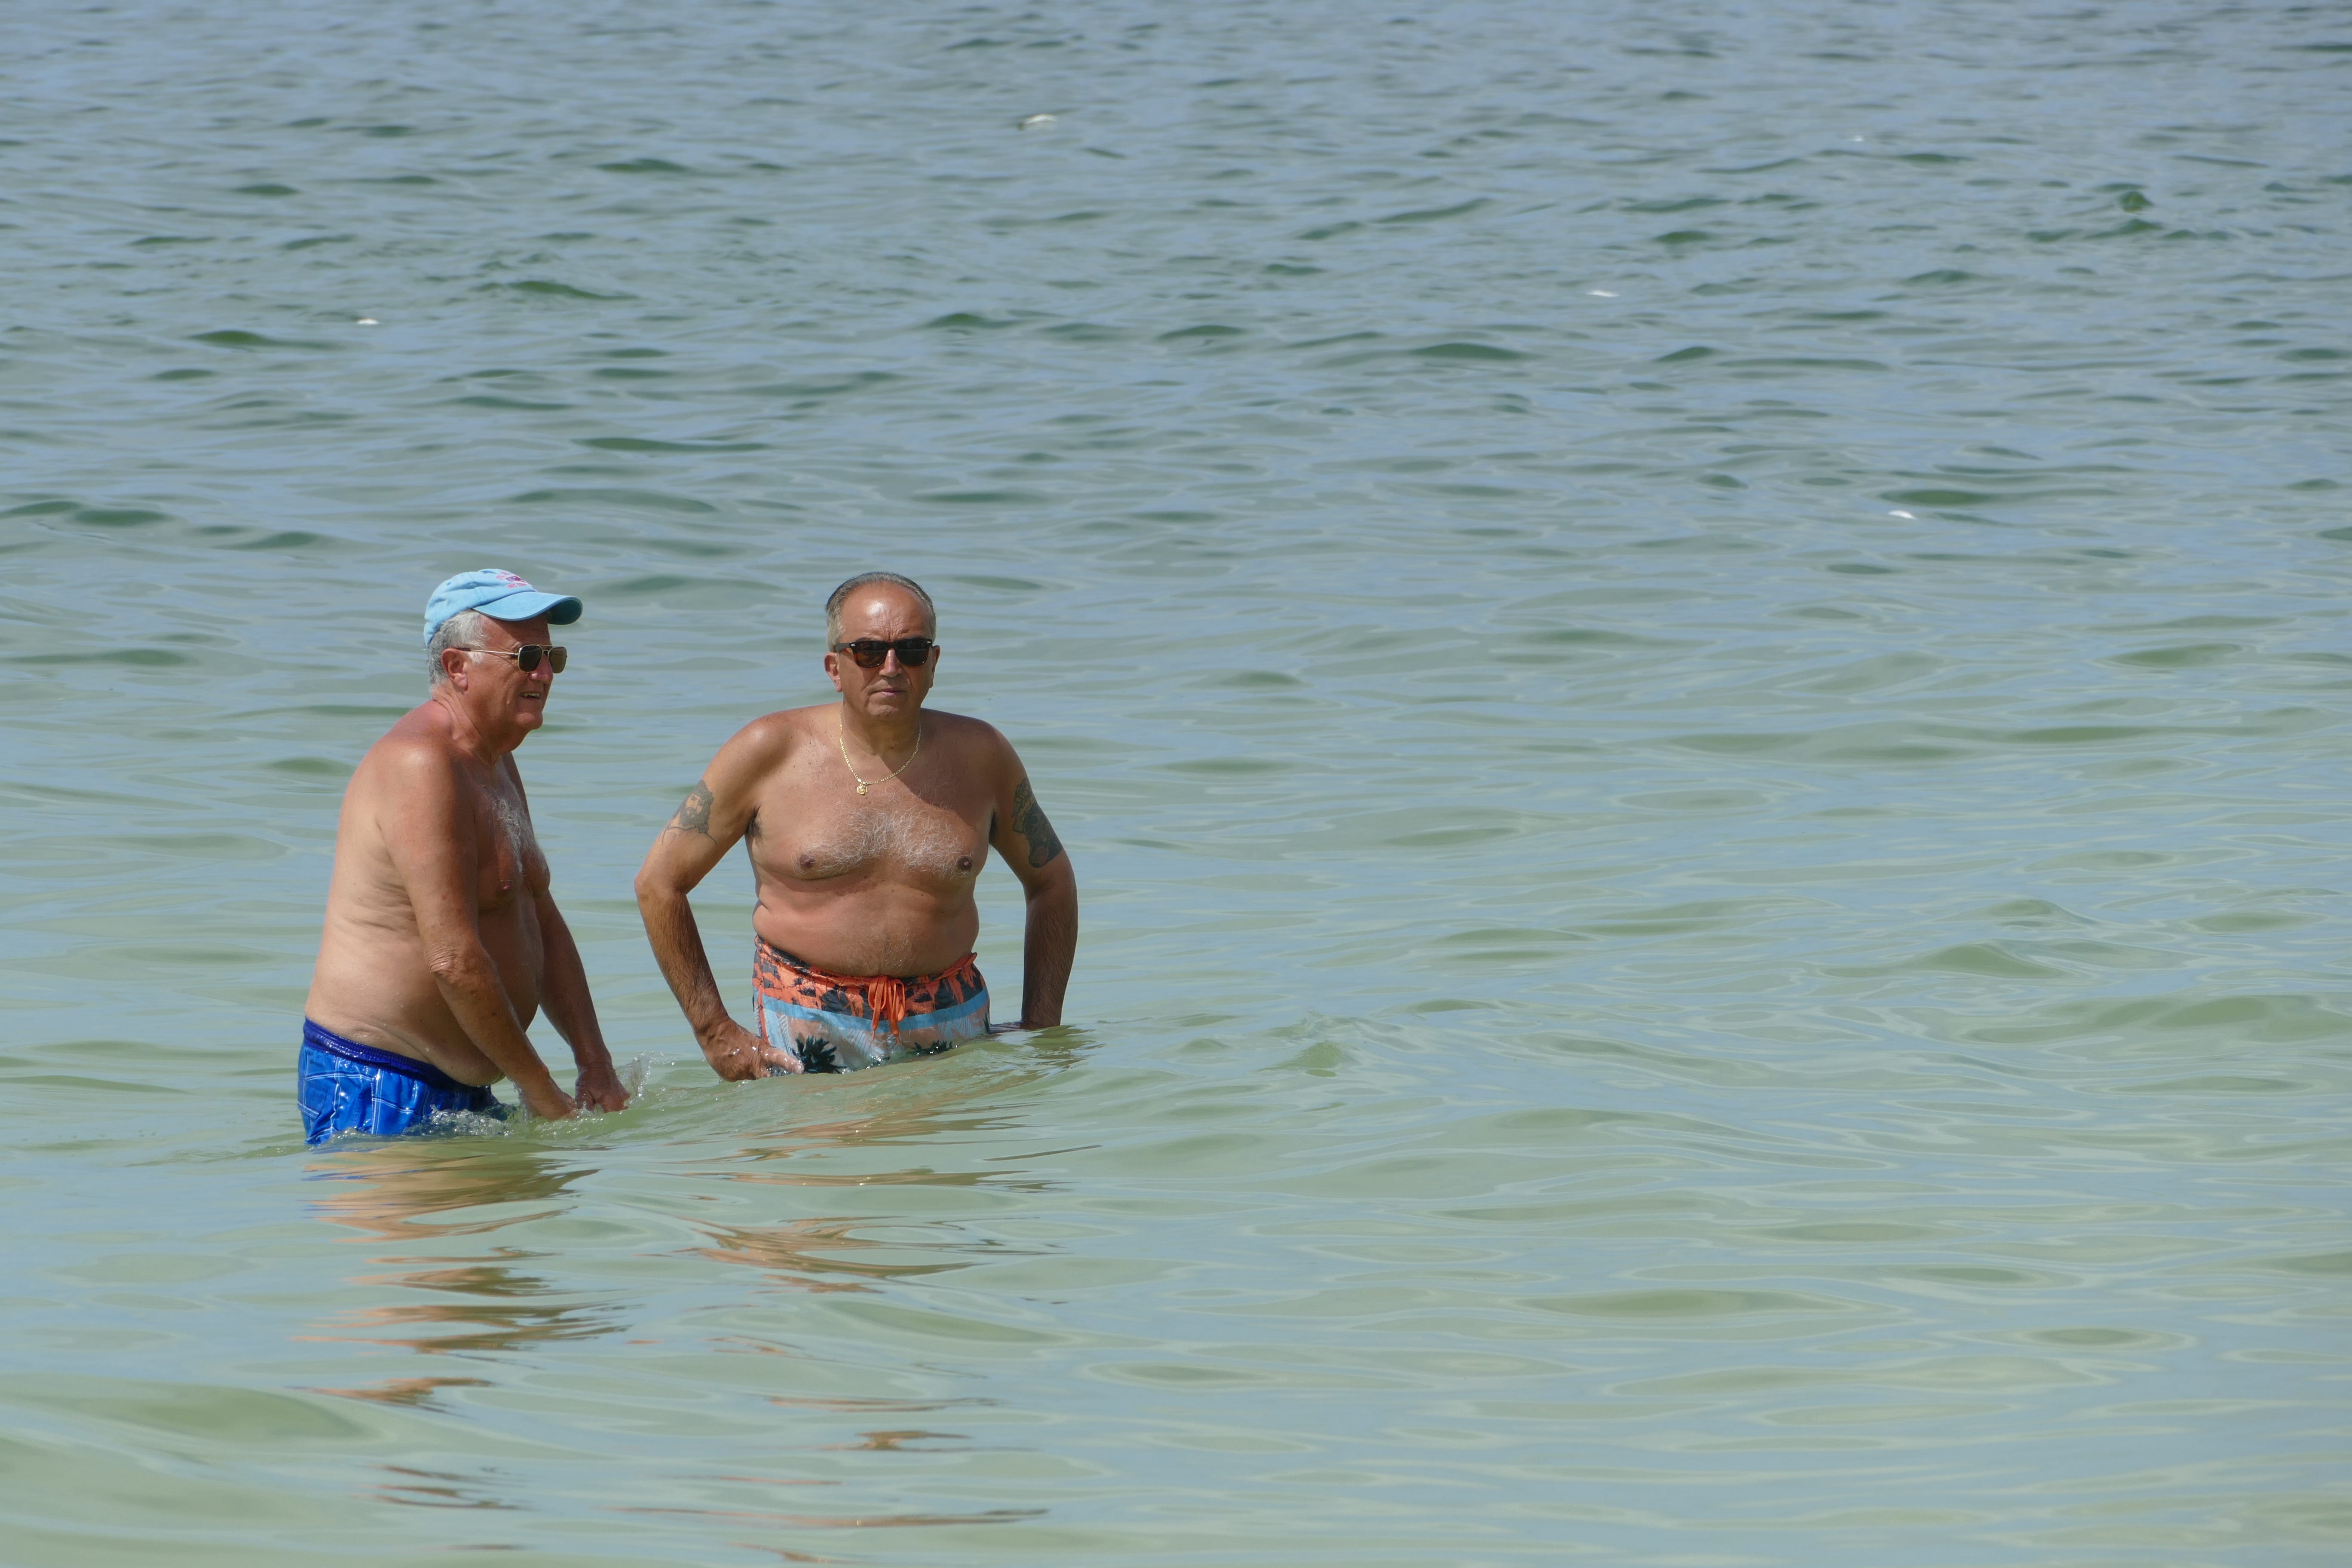 Two men enjoy the water of South Beach, Marco Island,  on Oct. 9. Dozens of dead fish washed ashore Wednesday on Marco Island as government agencies alerted of high levels of the organism that causes the red tide.